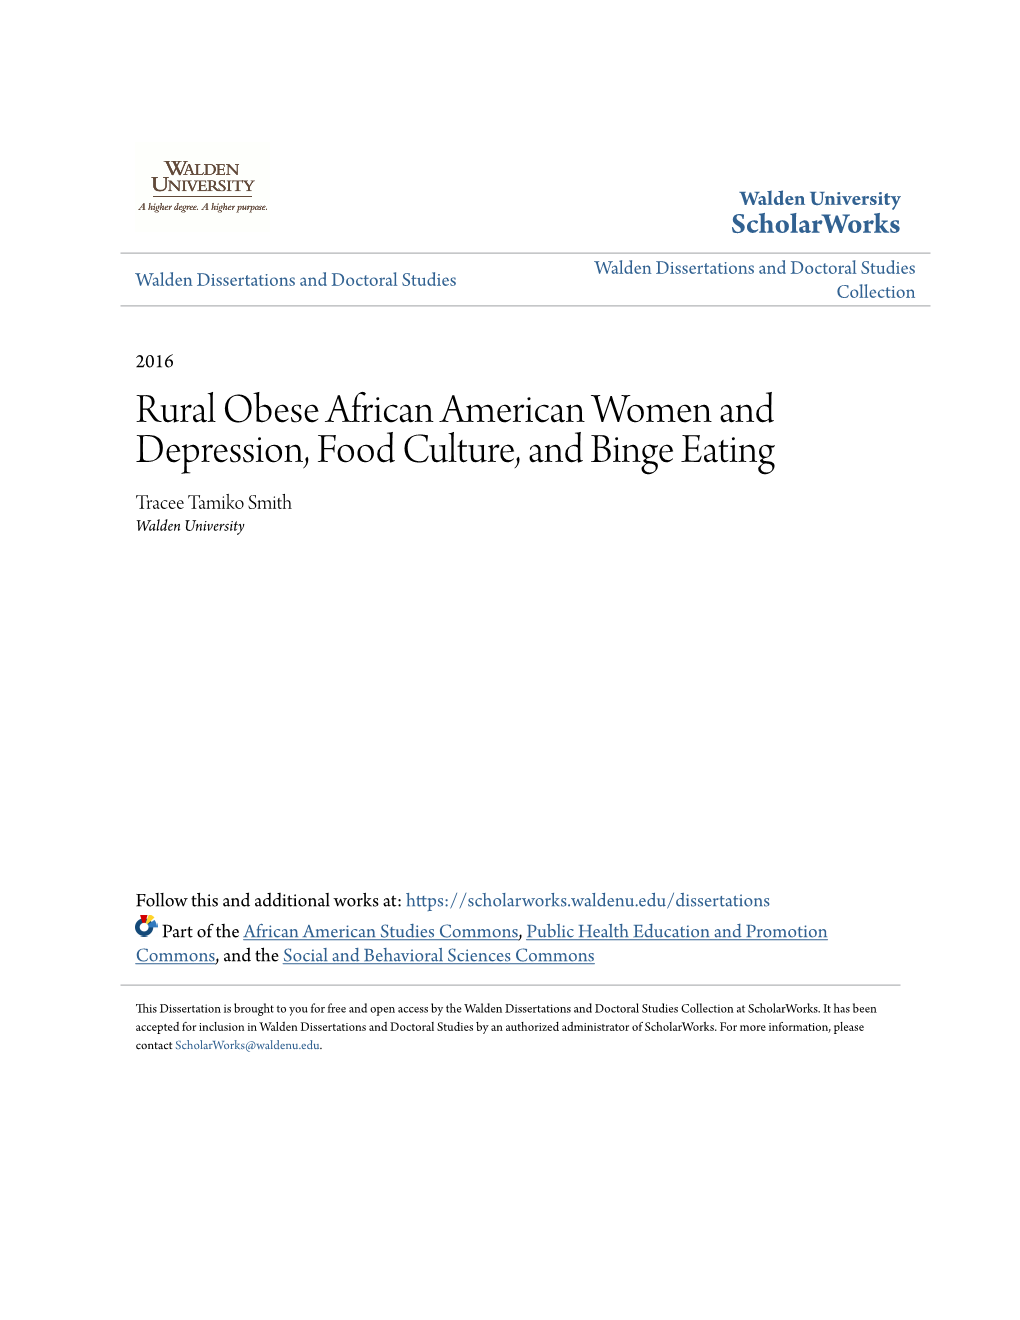 Rural Obese African American Women and Depression, Food Culture, and Binge Eating Tracee Tamiko Smith Walden University